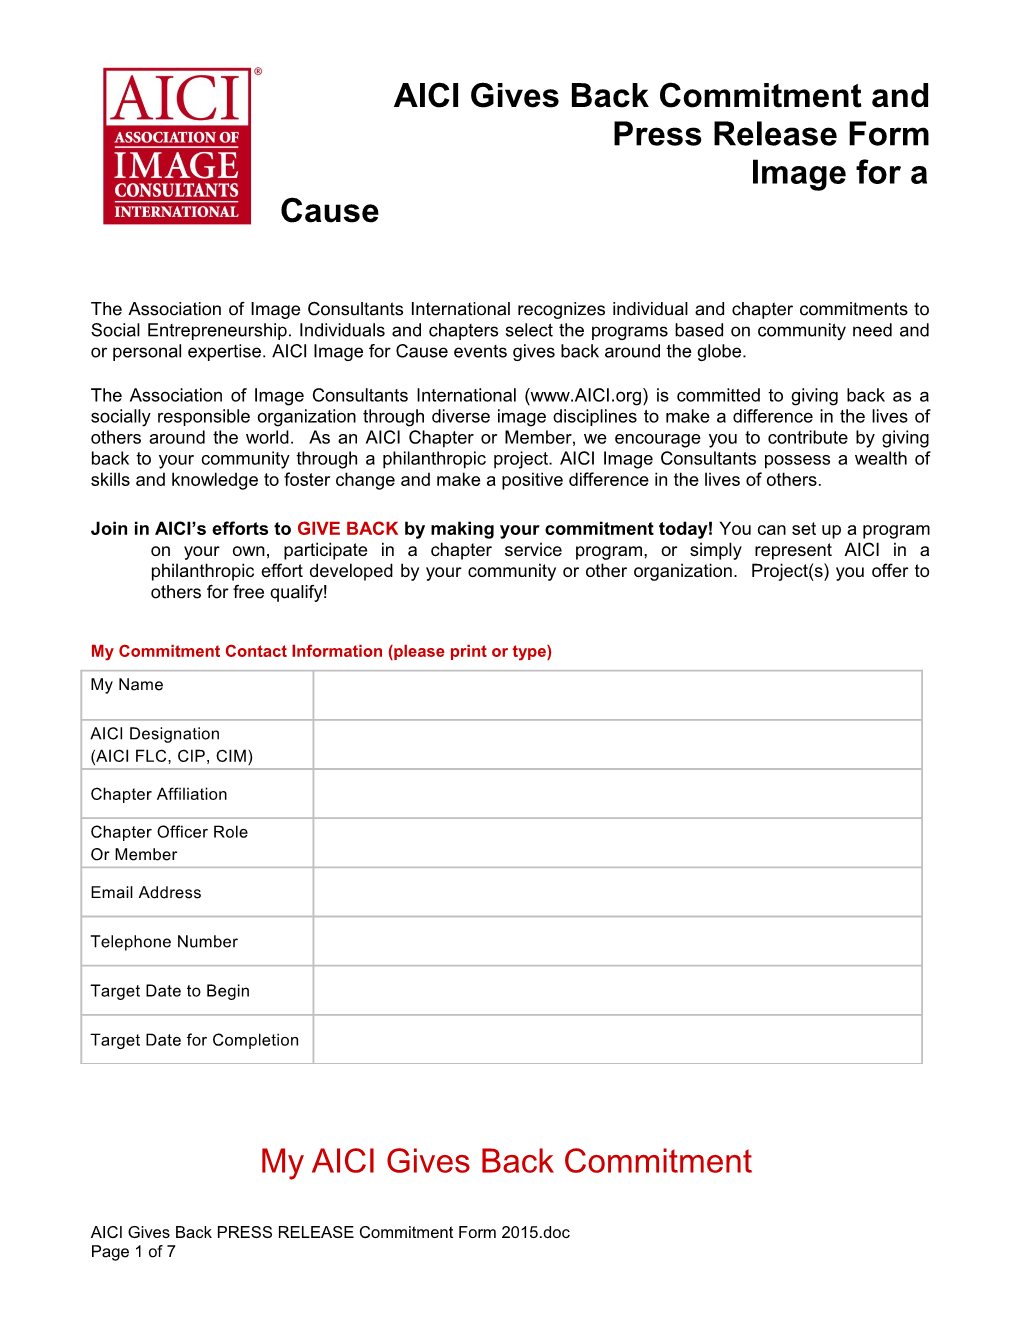 AICI Gives Back Commitment Form